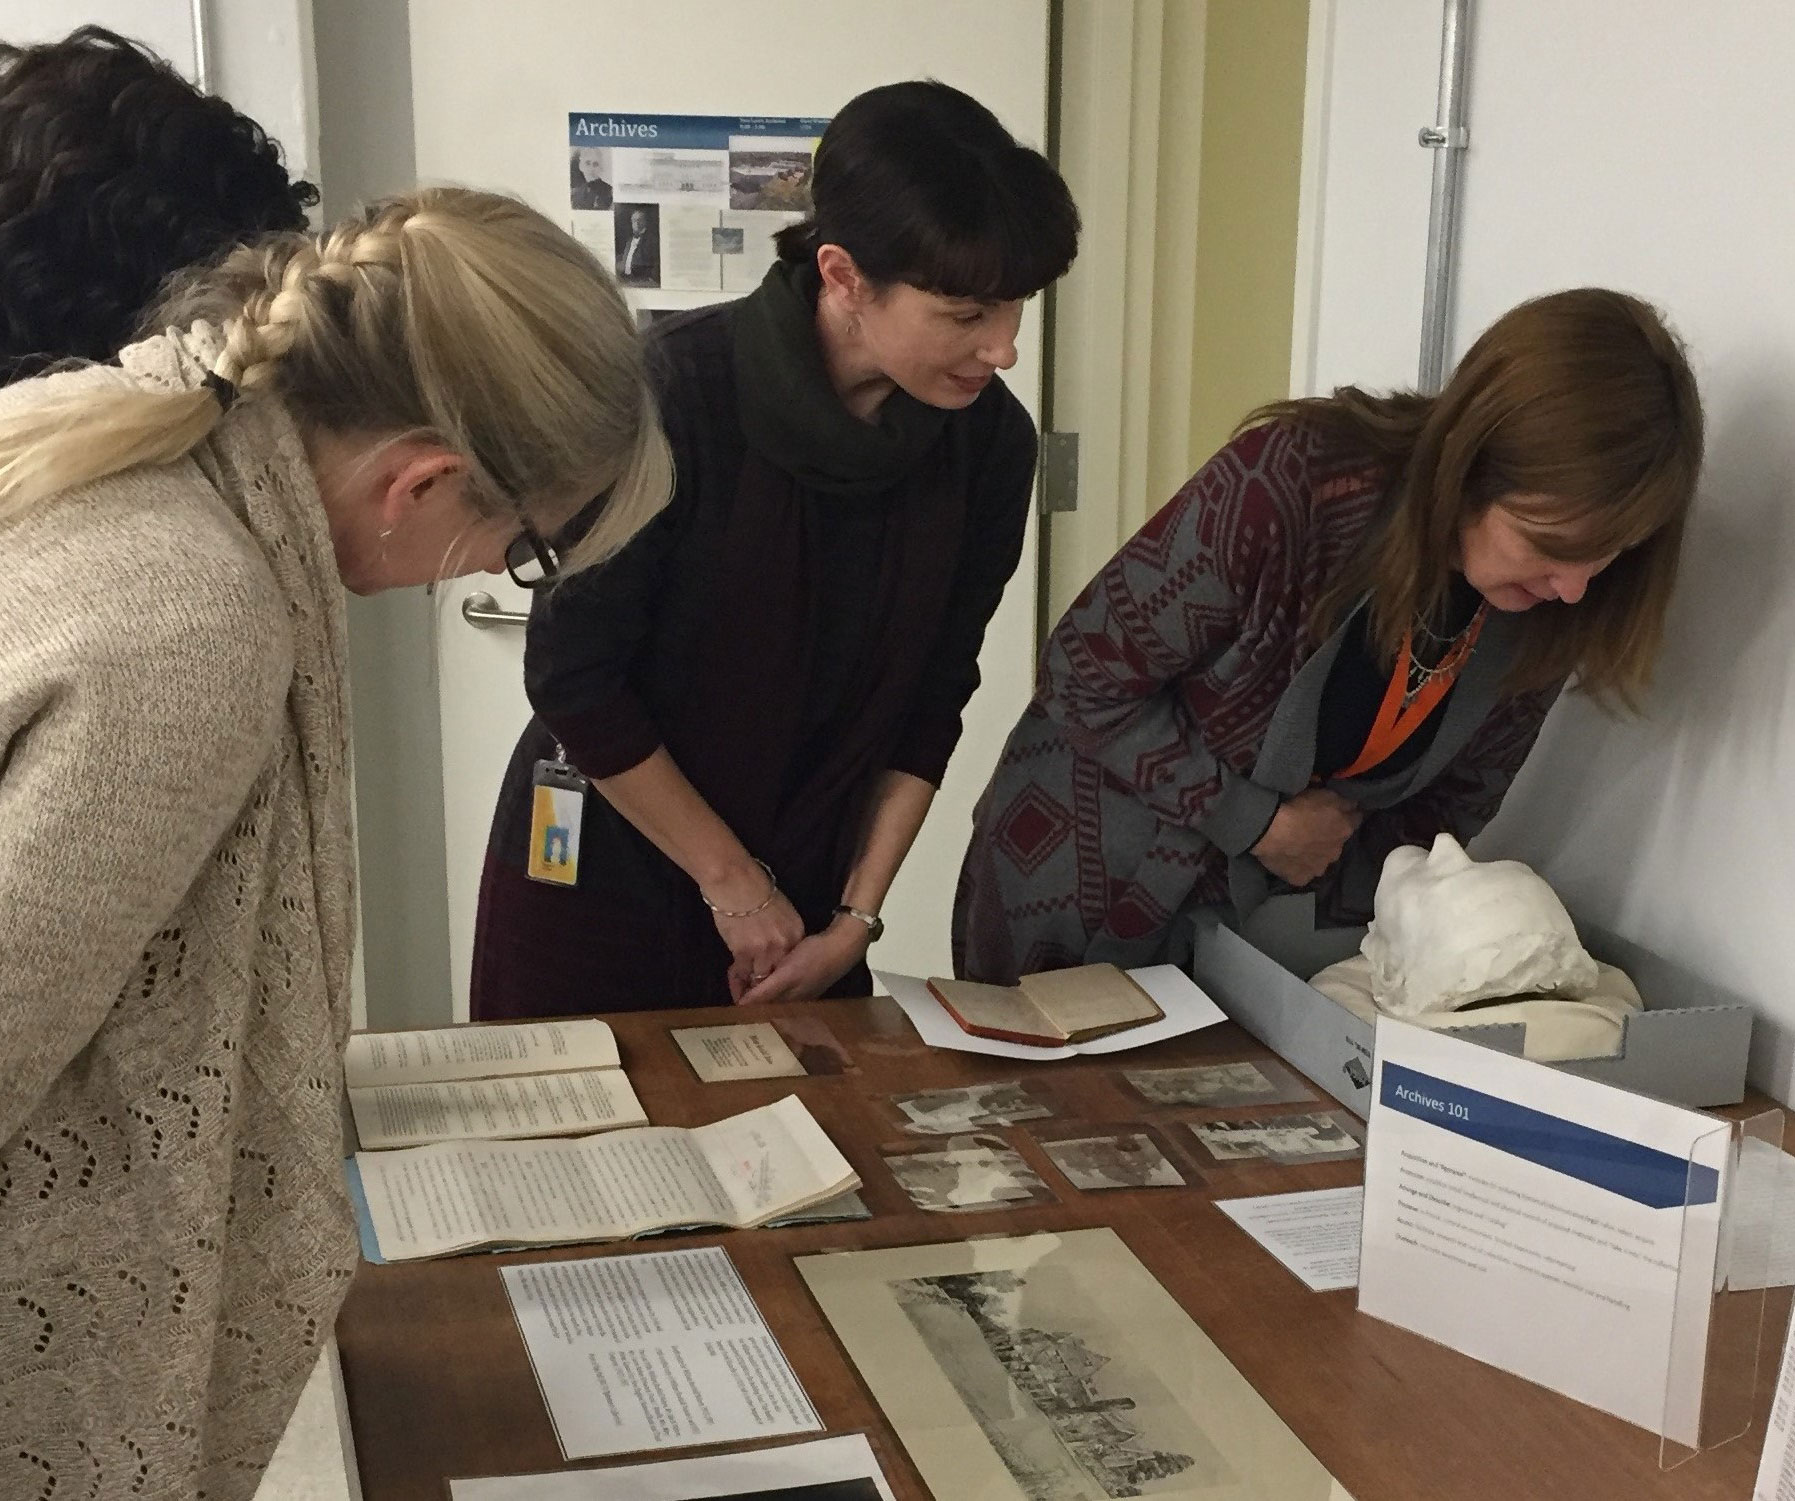 4 women looking at physical documents from the Archives